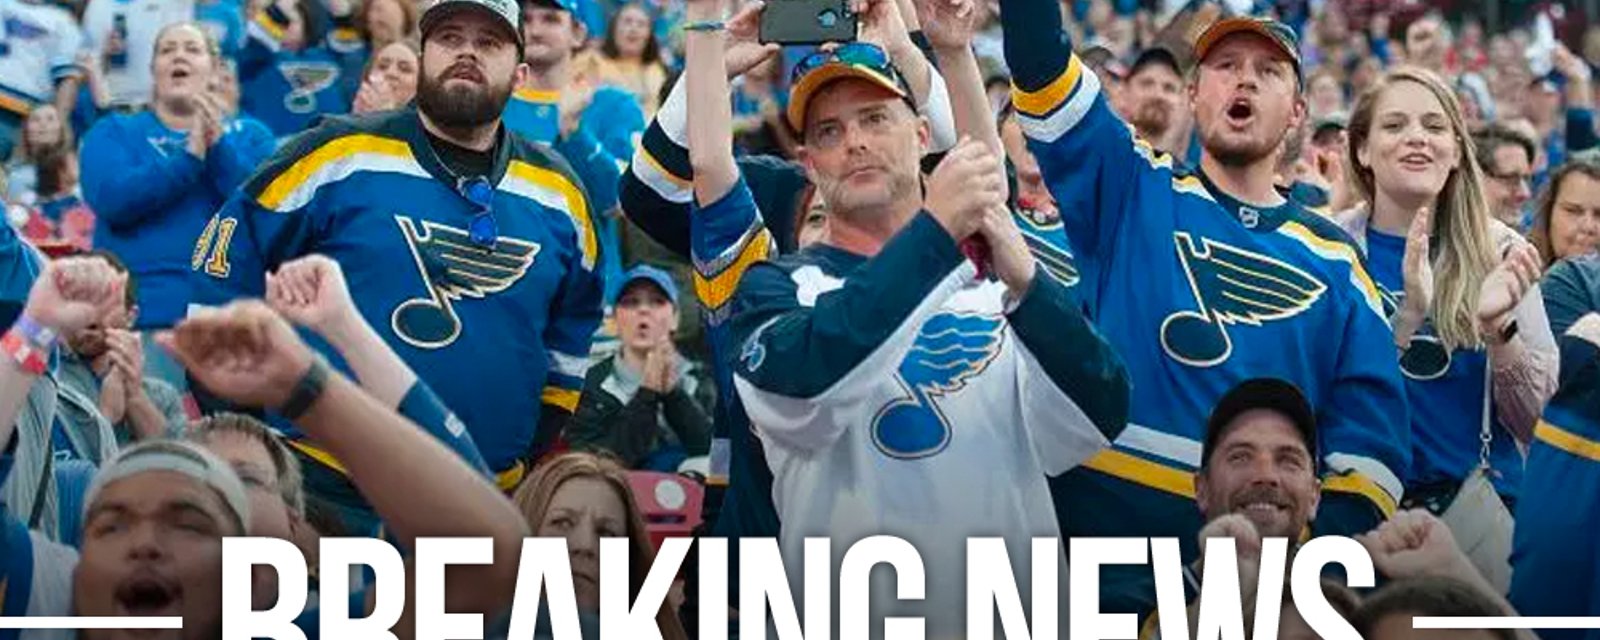 Blues officially welcome fans back to Enterprise Center starting Feb. 2nd